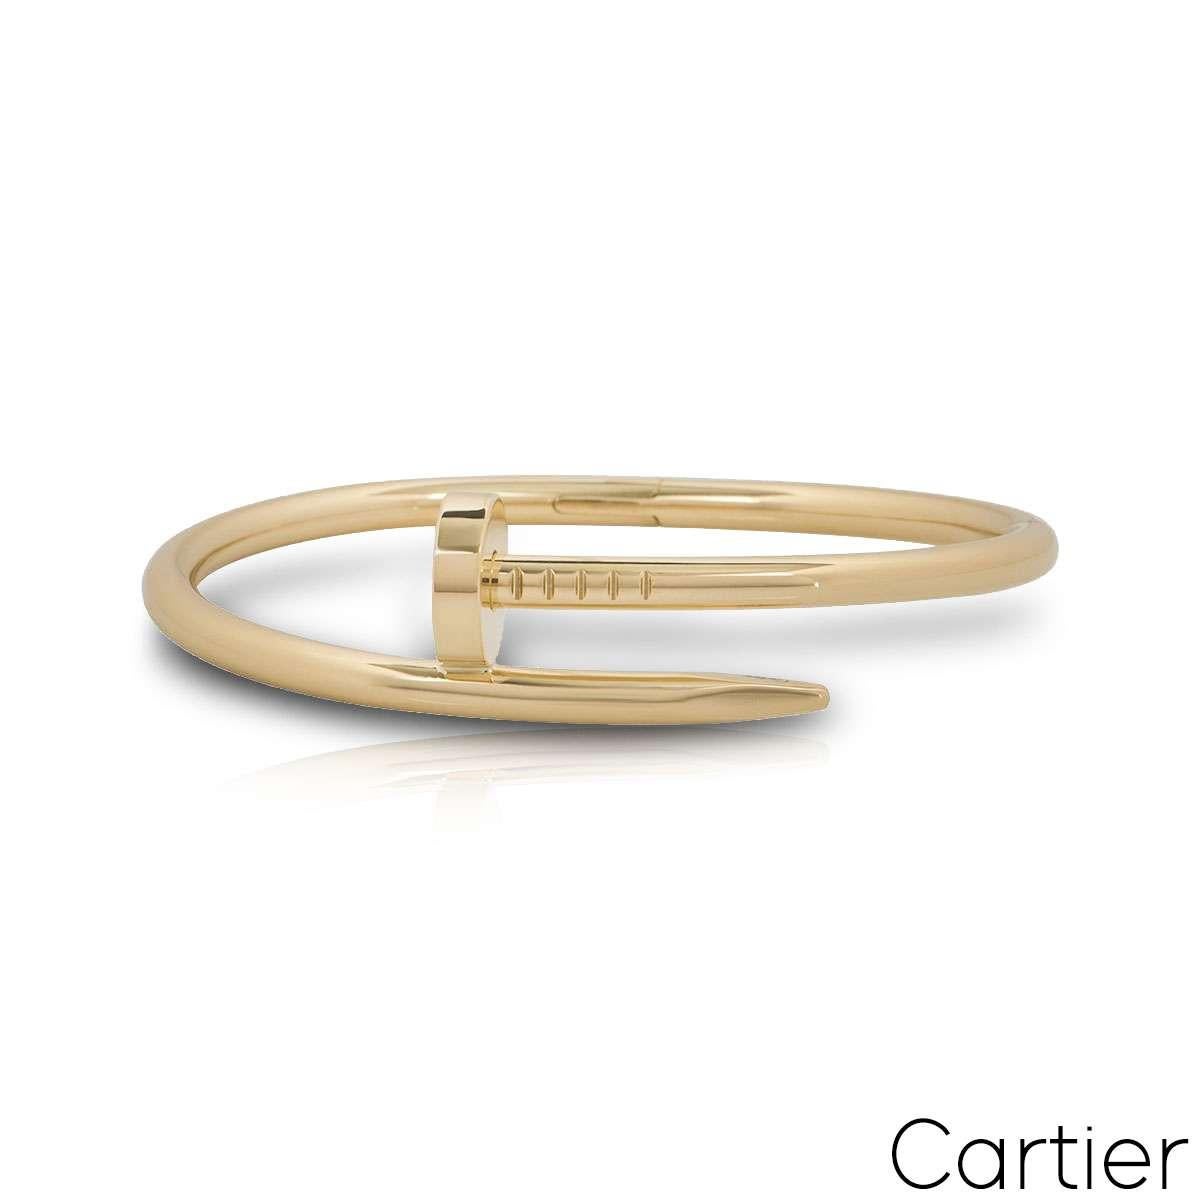 Cartier Yellow Gold Juste Un Clou Bracelet Size 16 B6048216 In Excellent Condition For Sale In London, GB